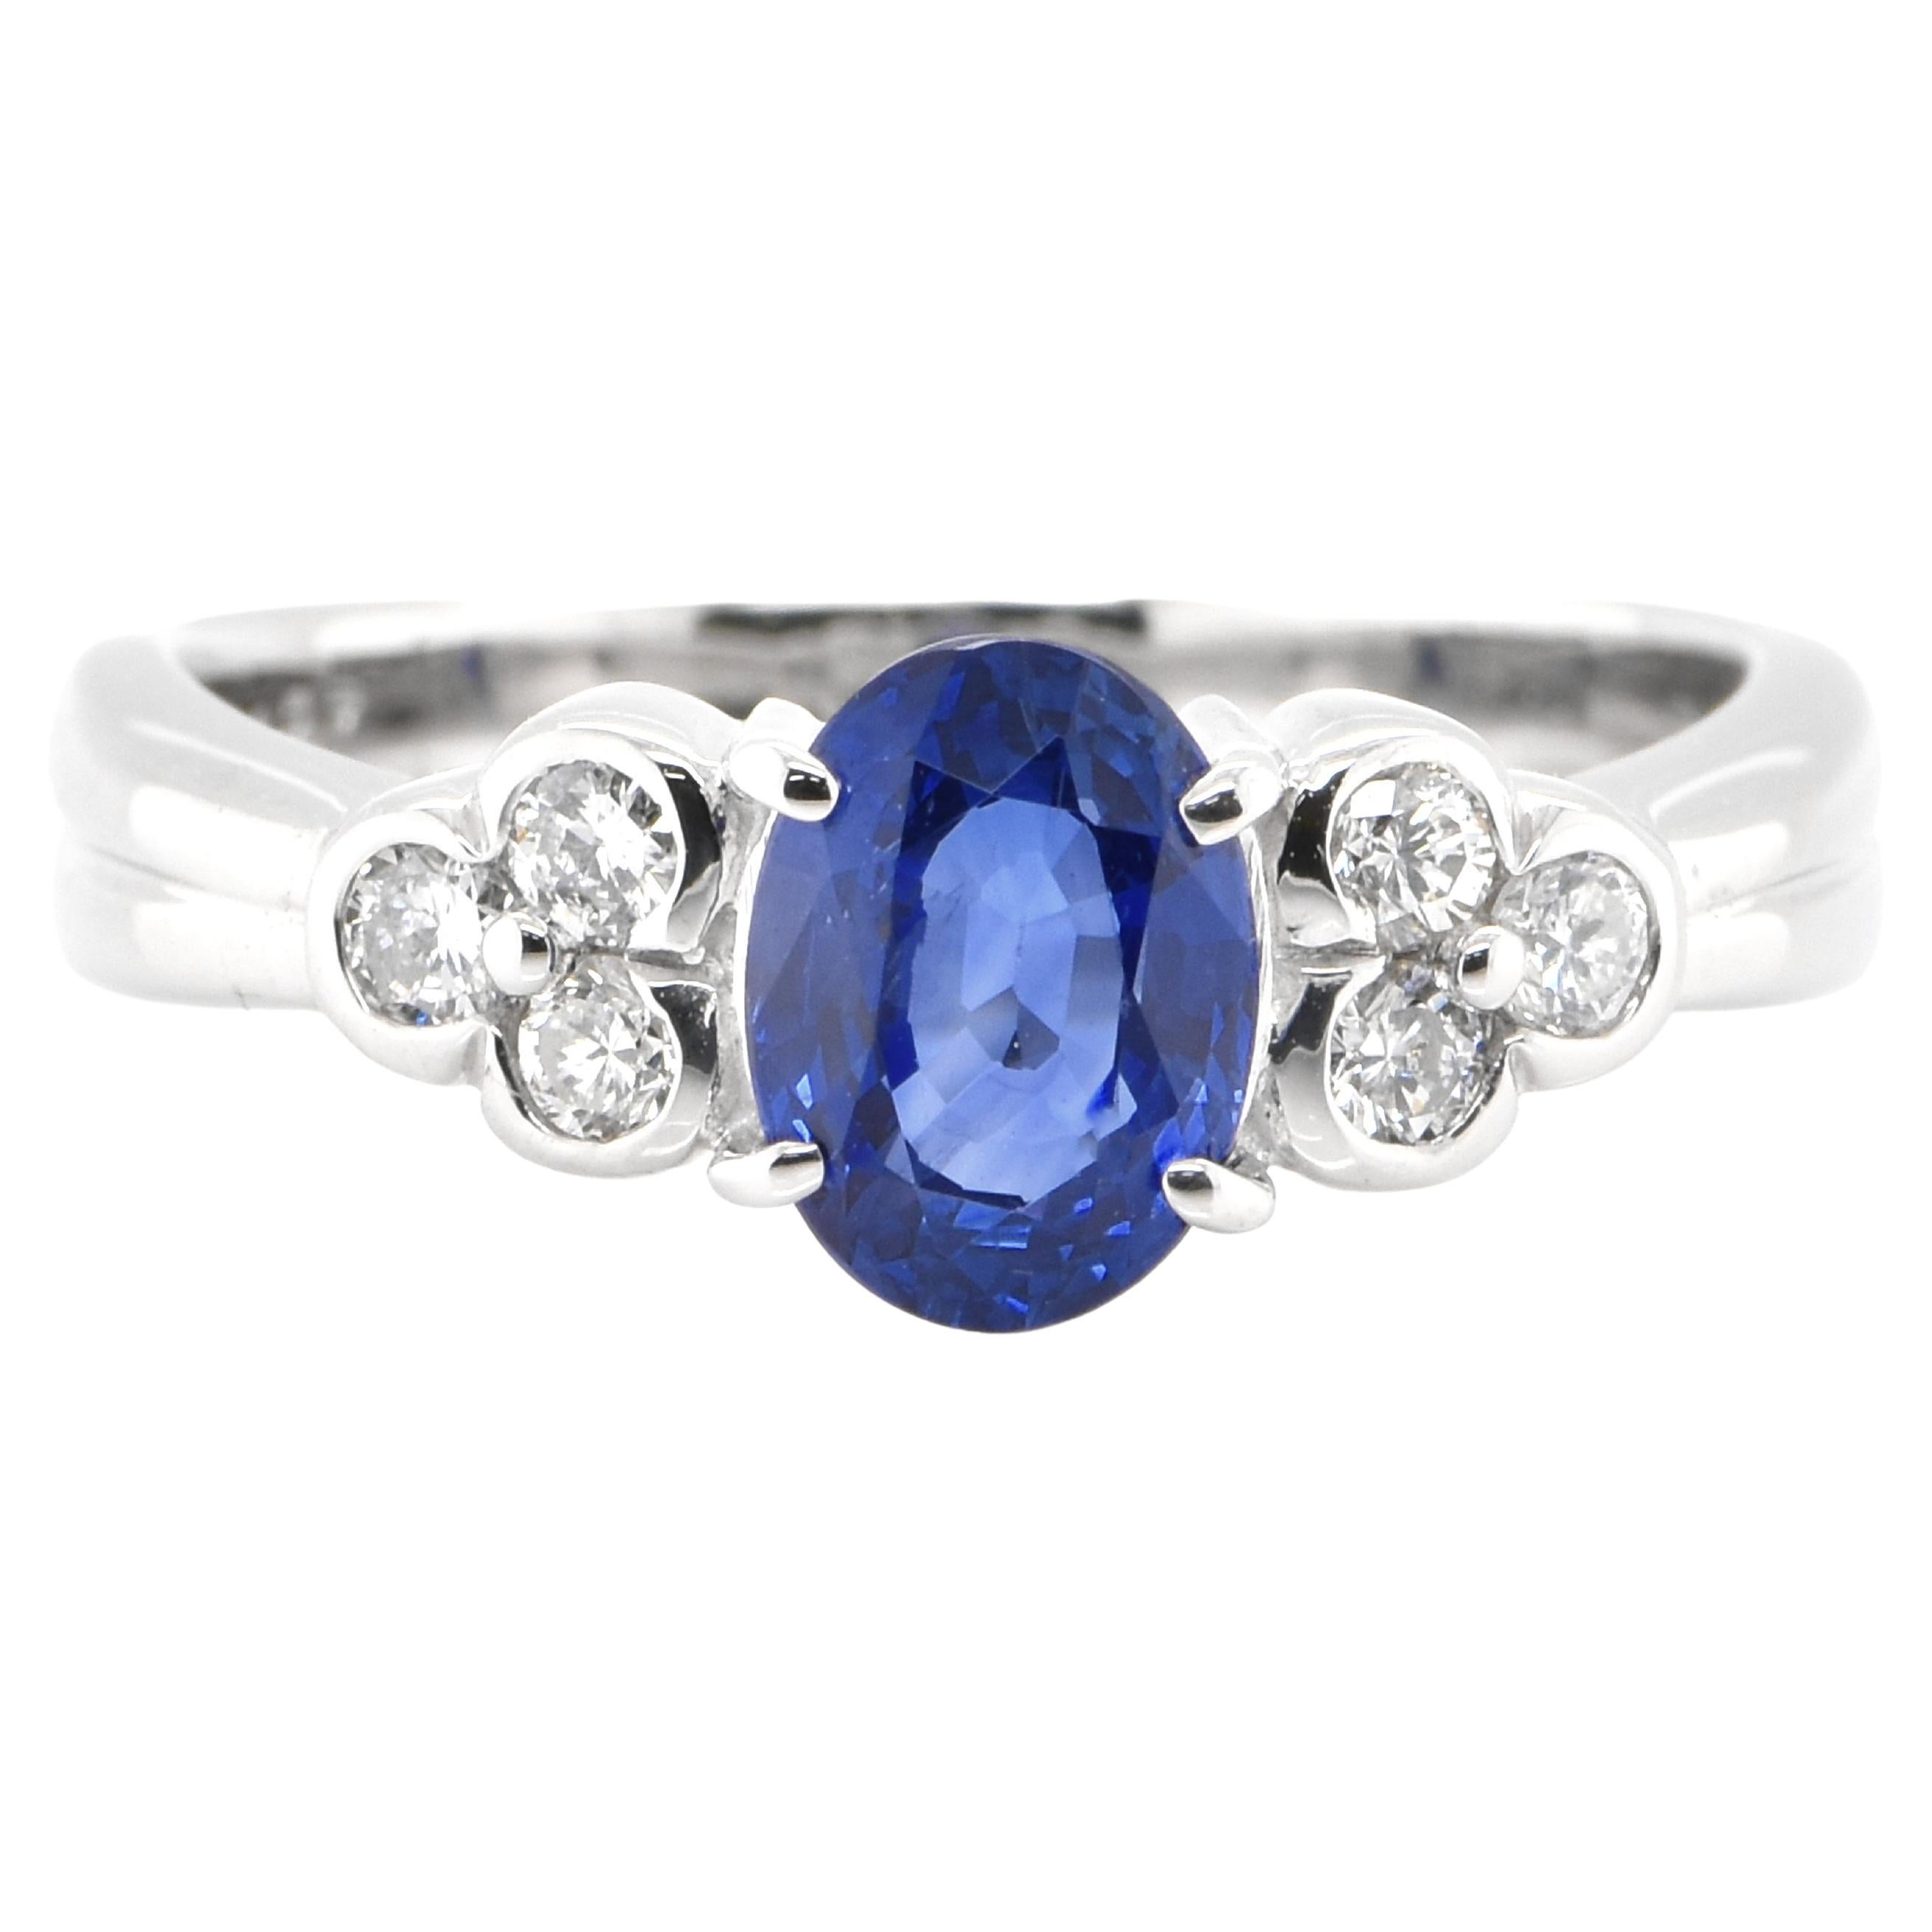 1.27 Carat Natural Blue Sapphire and Diamond Ring Made in Platinum For Sale